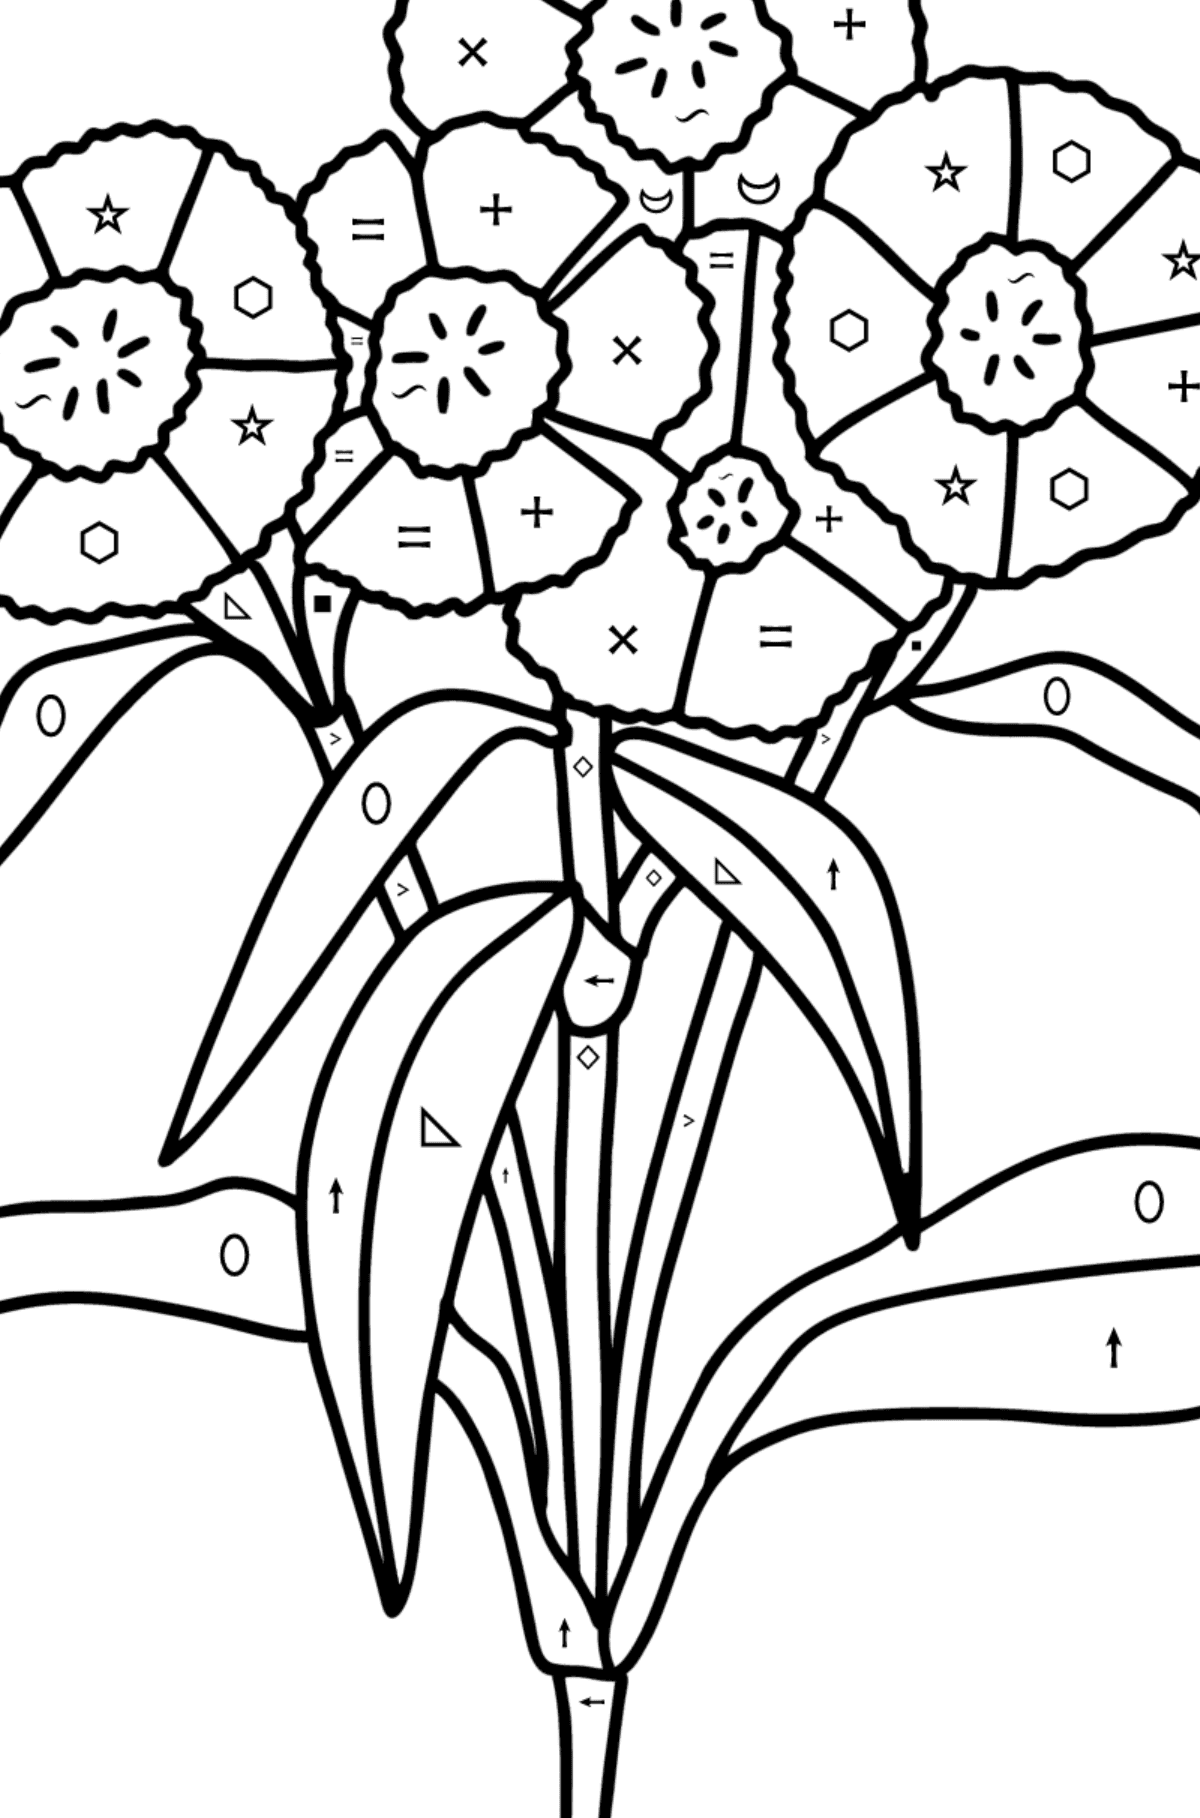 Carnations coloring page - Coloring by Symbols and Geometric Shapes for Kids